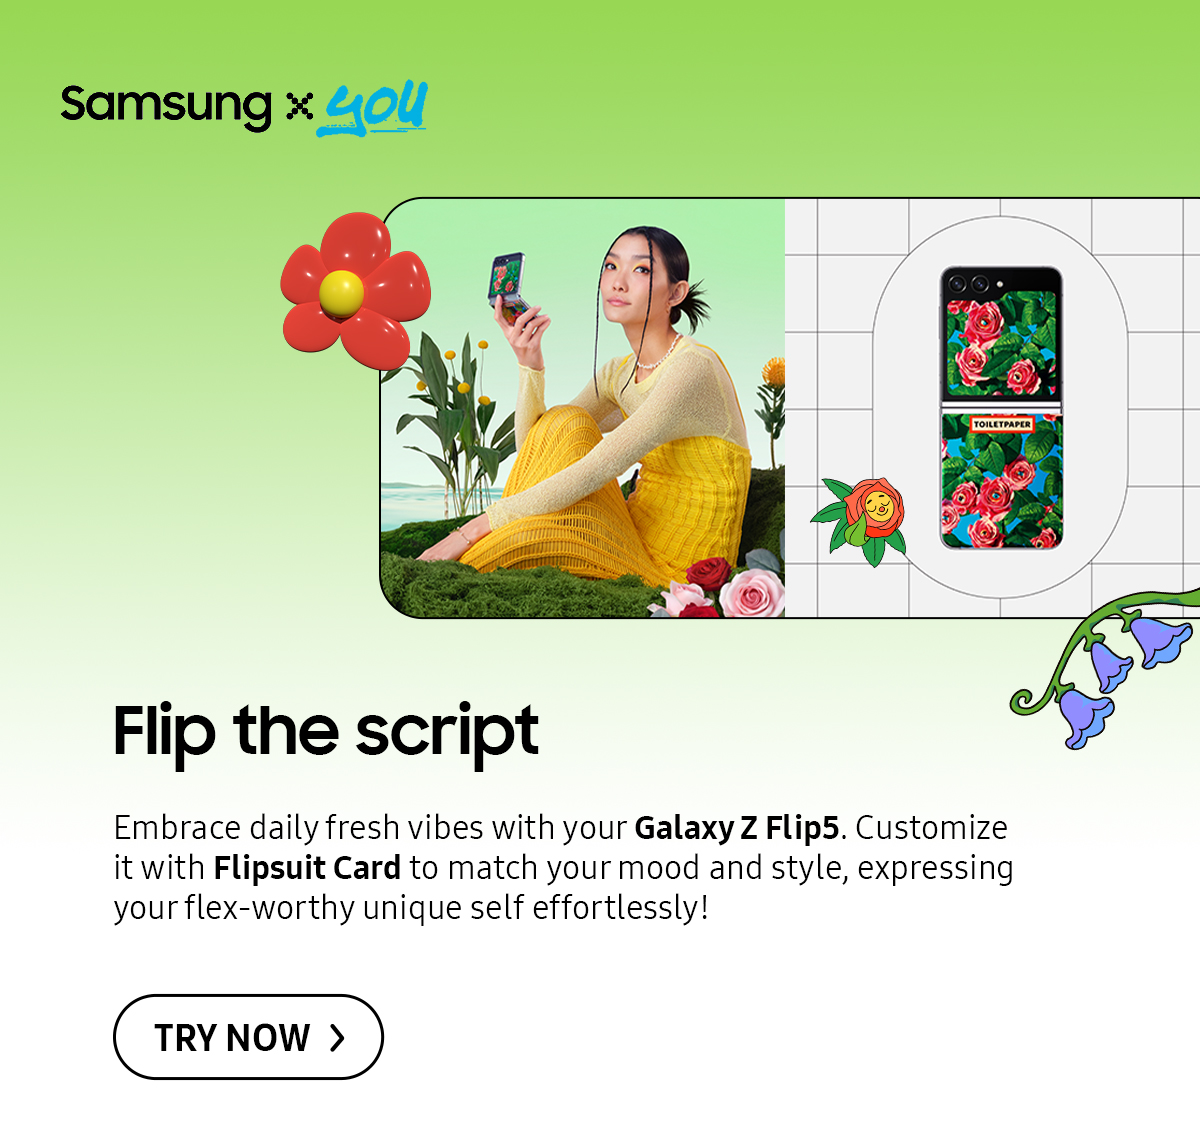 Flip the script | Embrace daily fresh vibes with your Galaxy Z Flip5. Customize it with Flipsuit Card to match your mood and style, expressing your flex-worthy unique self effortlessly! Click here to try now!